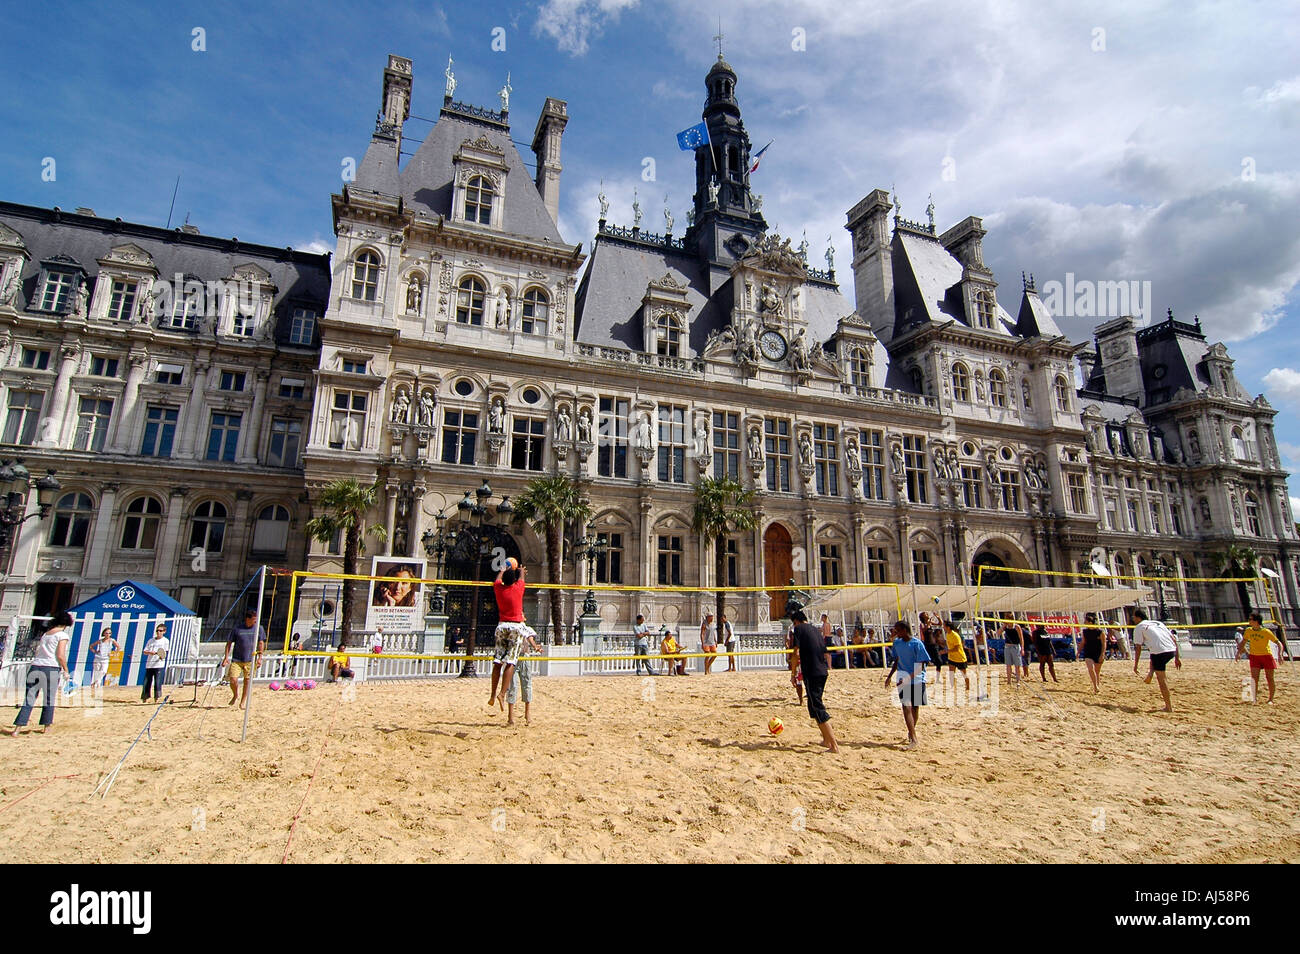 People playing beach volleyball on an artificial field set up in front of City Hall during the Paris Plage event, Paris, France. Stock Photo